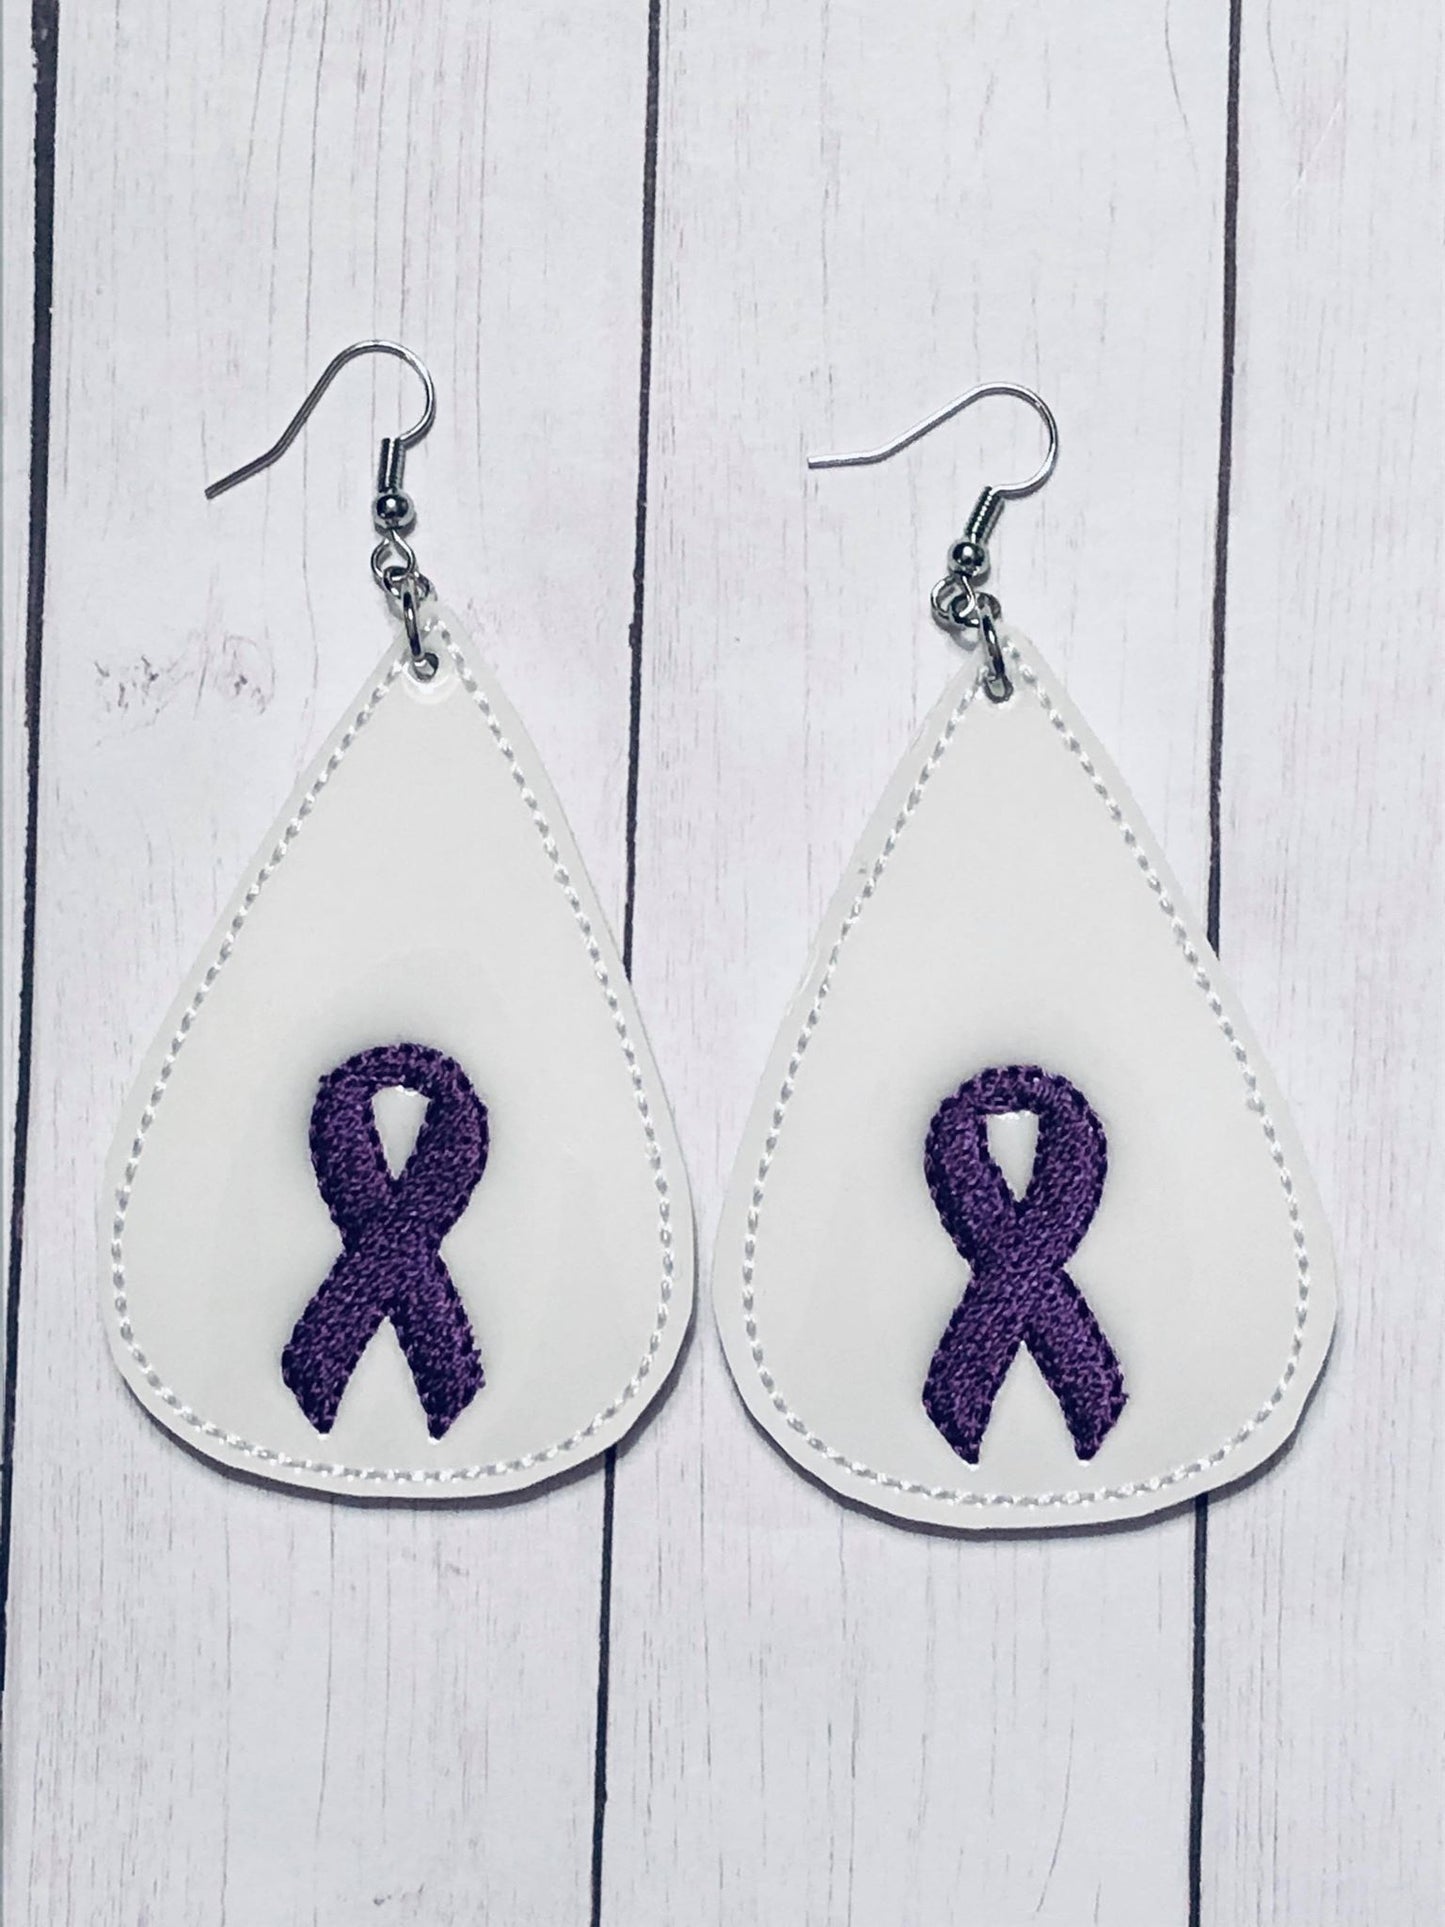 Awareness Ribbon Tear Drop Earrings - 3 sizes - 4x4 and 5x7 Grouped- Digital Embroidery Design